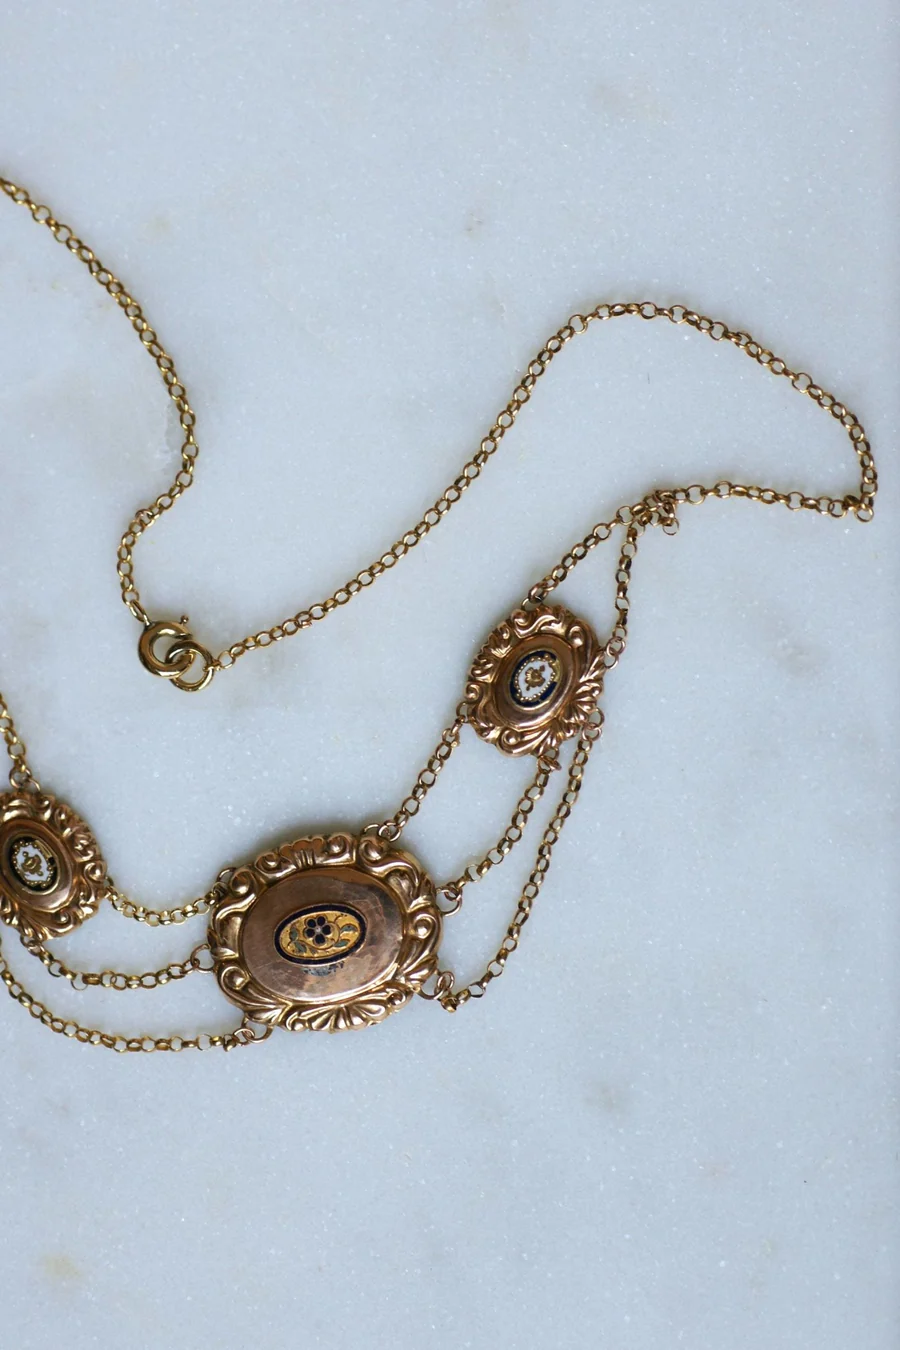 Antique Gold and Enamel Slavery Necklace - Penelope Gallery